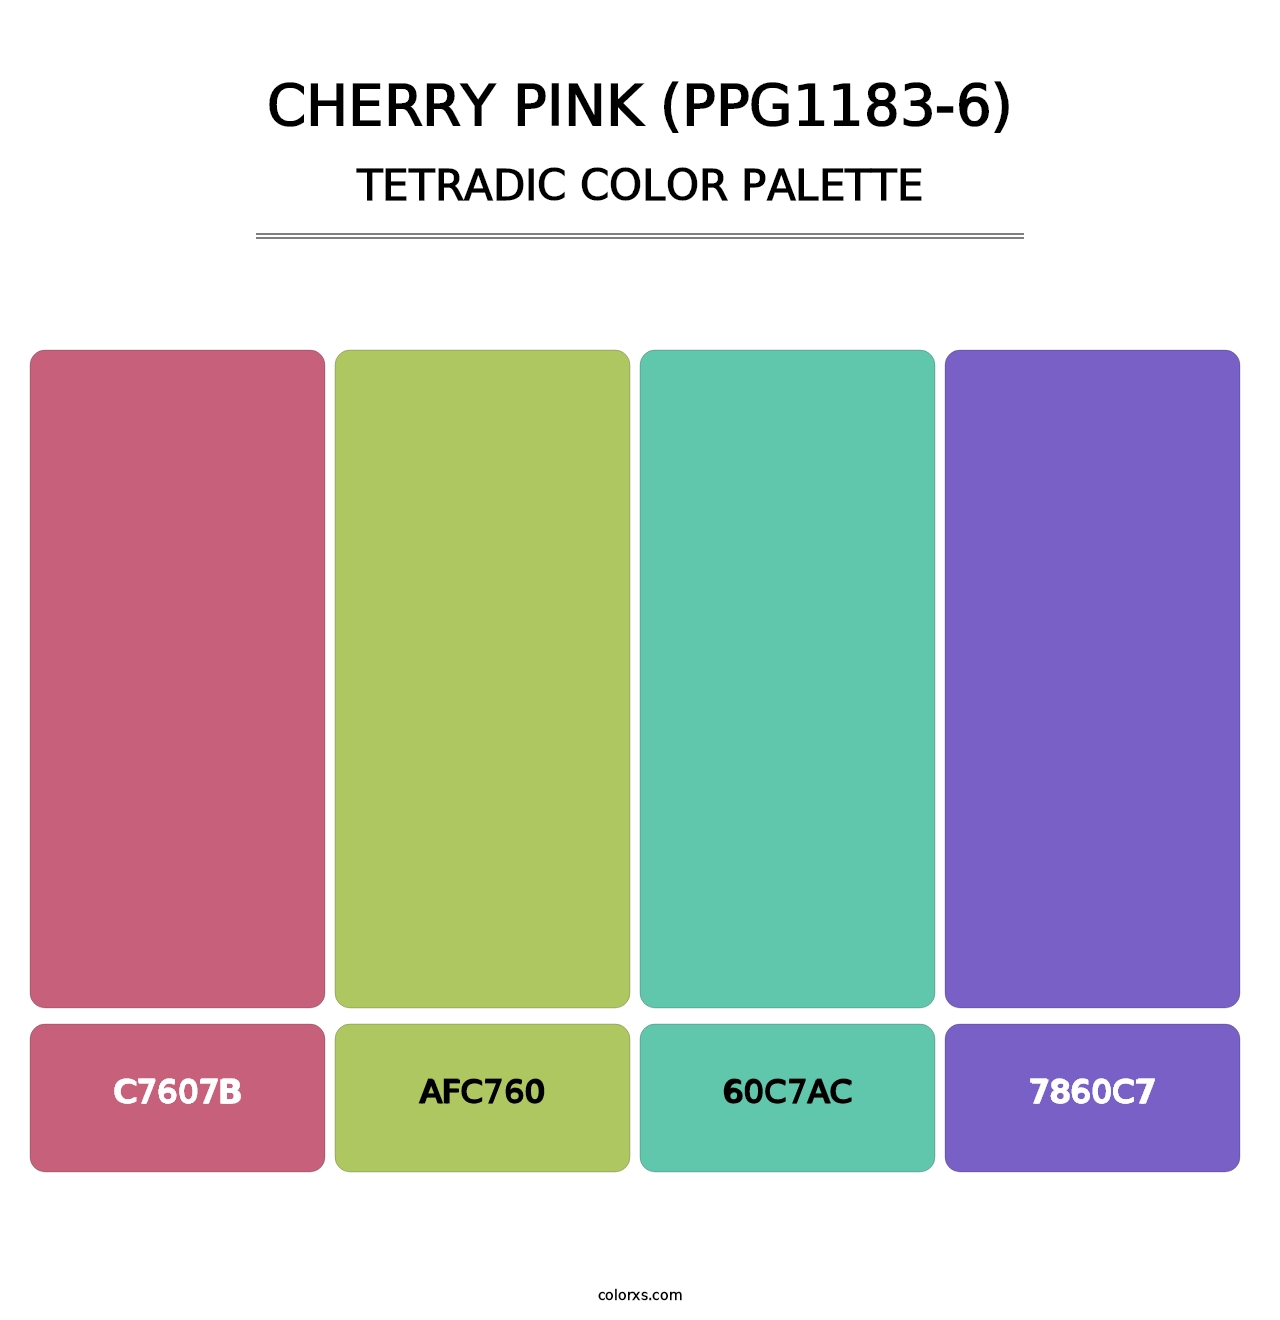 Cherry Pink (PPG1183-6) - Tetradic Color Palette